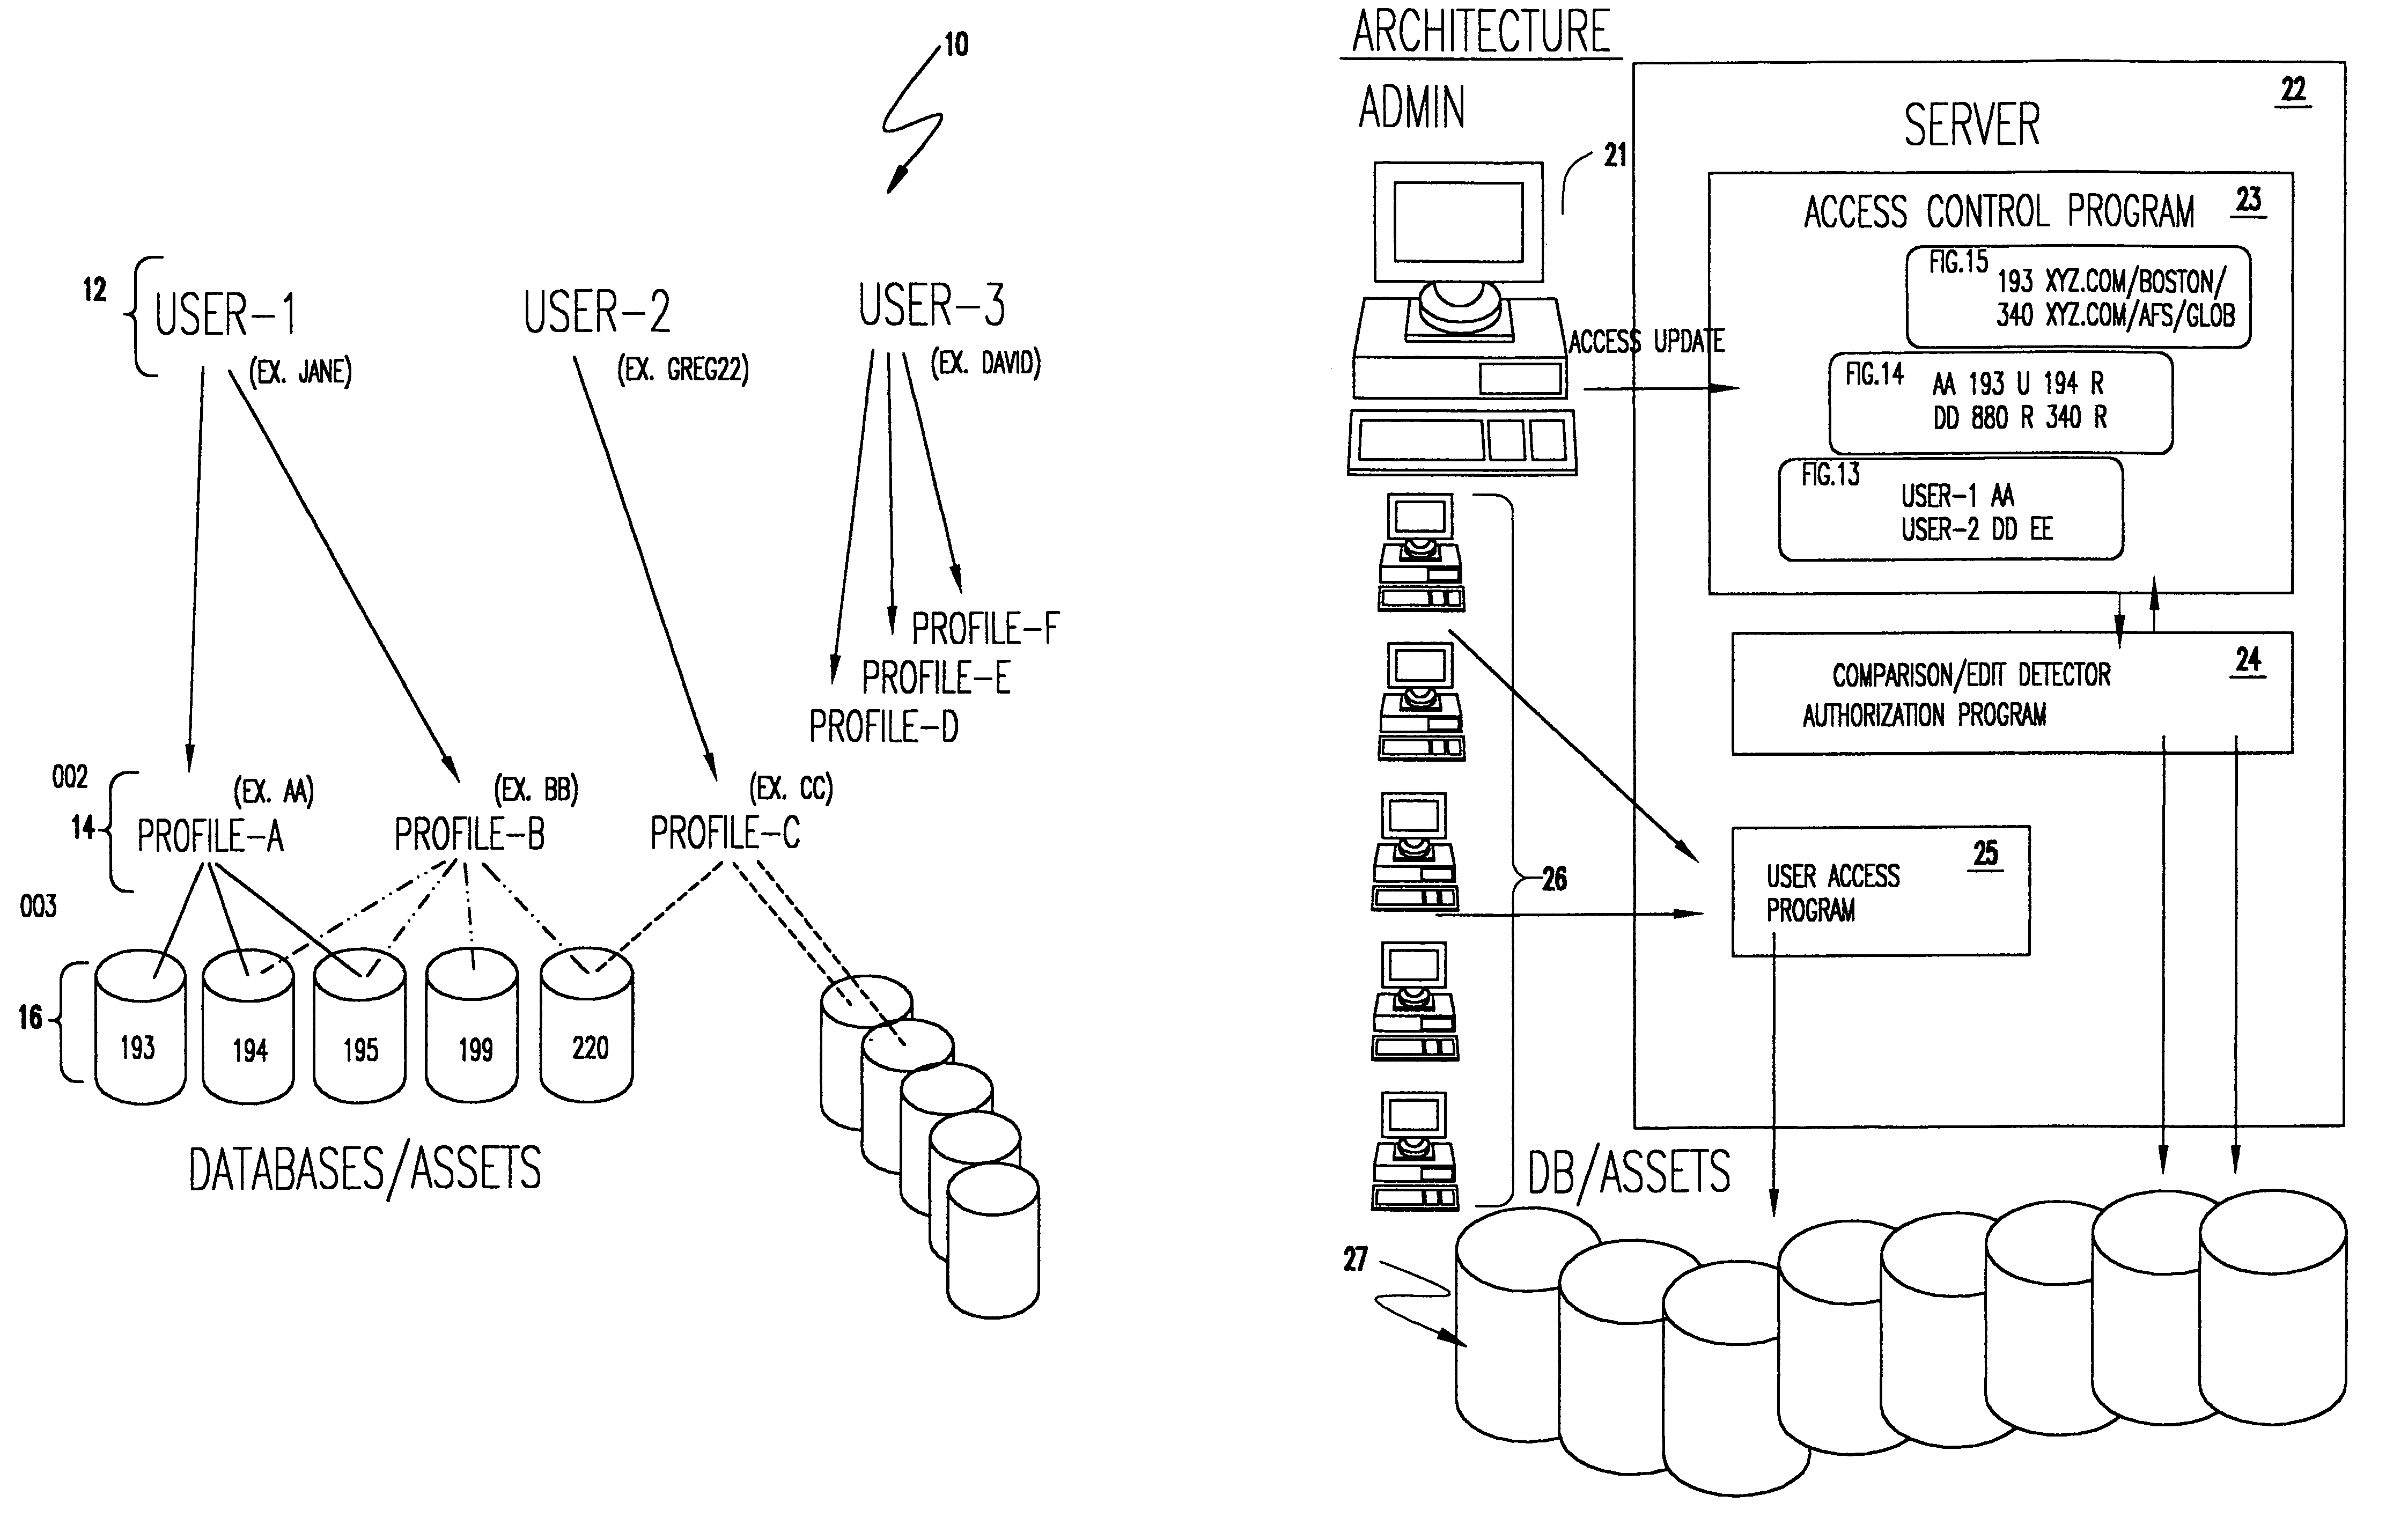 Enhancement to a system for automated generation of file access control system commands